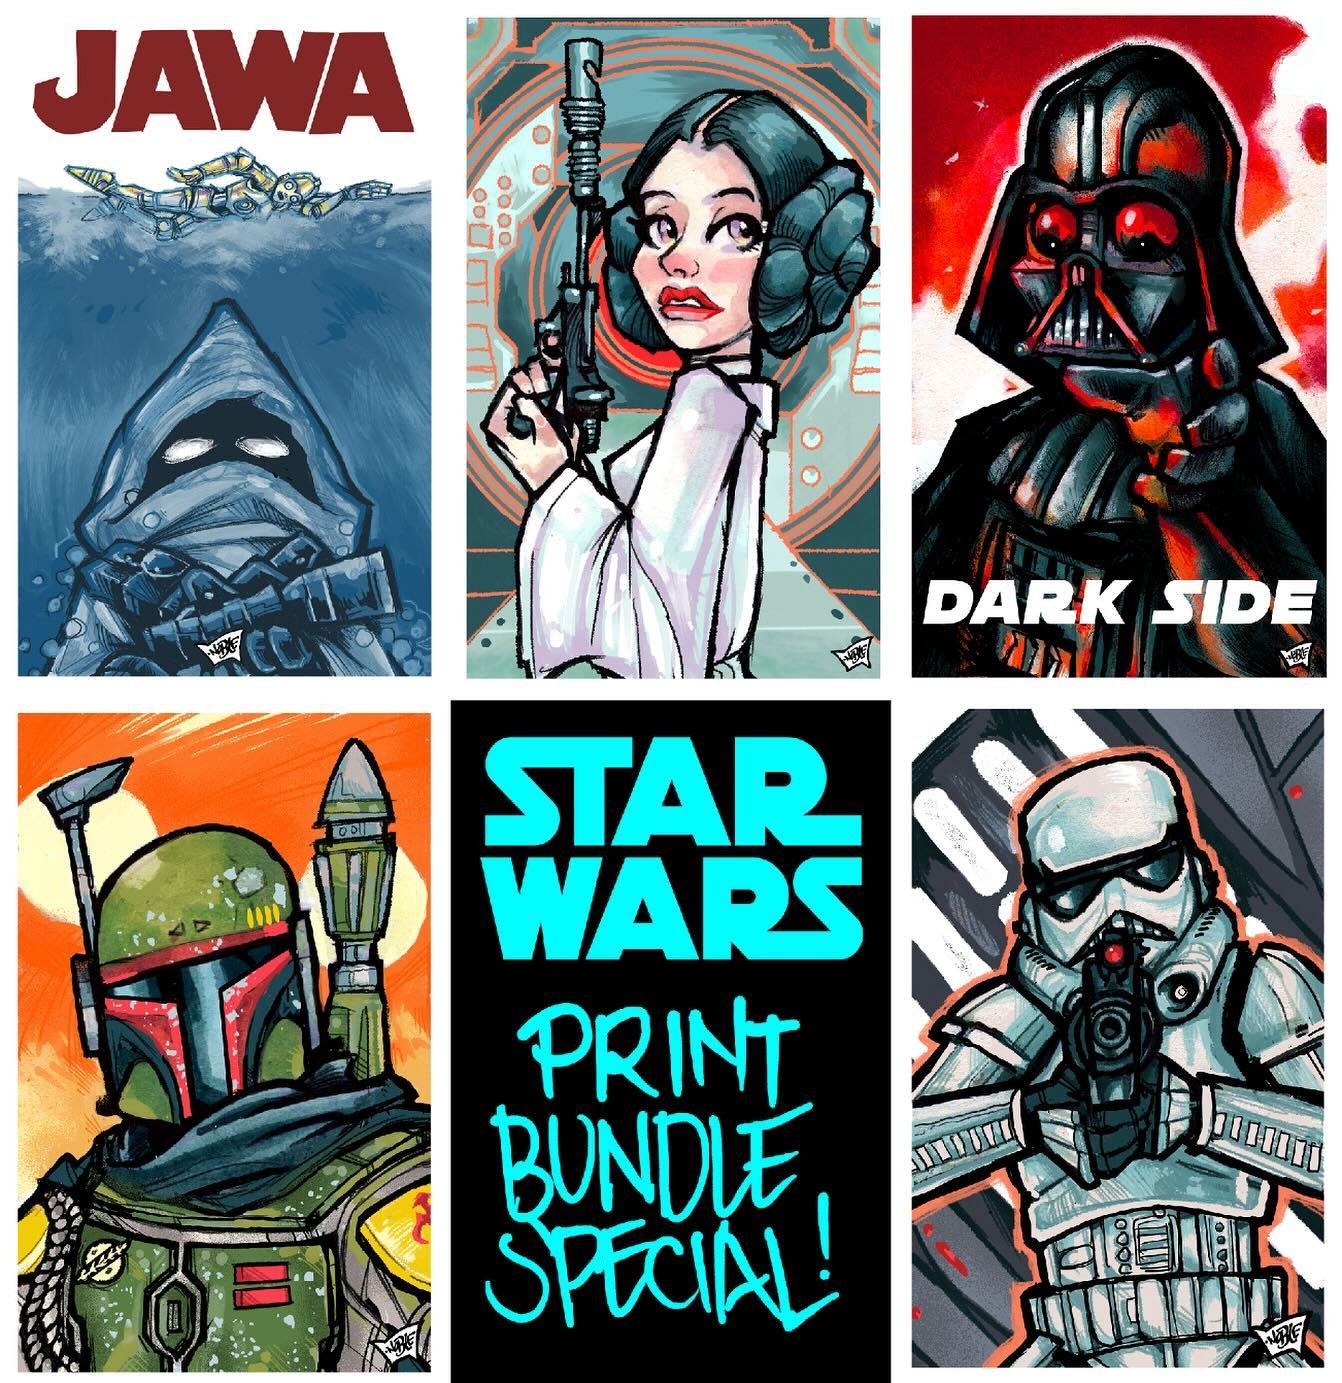 Show your love of STAR WARS with this set of (5) 11&rdquo; x 17&rdquo; archival prints, each backed and bagged with a signed certificate. Shipping&rsquo;s on me!

ONLY 3 SETS AVAILABLE!

Hit that first link in bio to get yours at light speed:

Just i